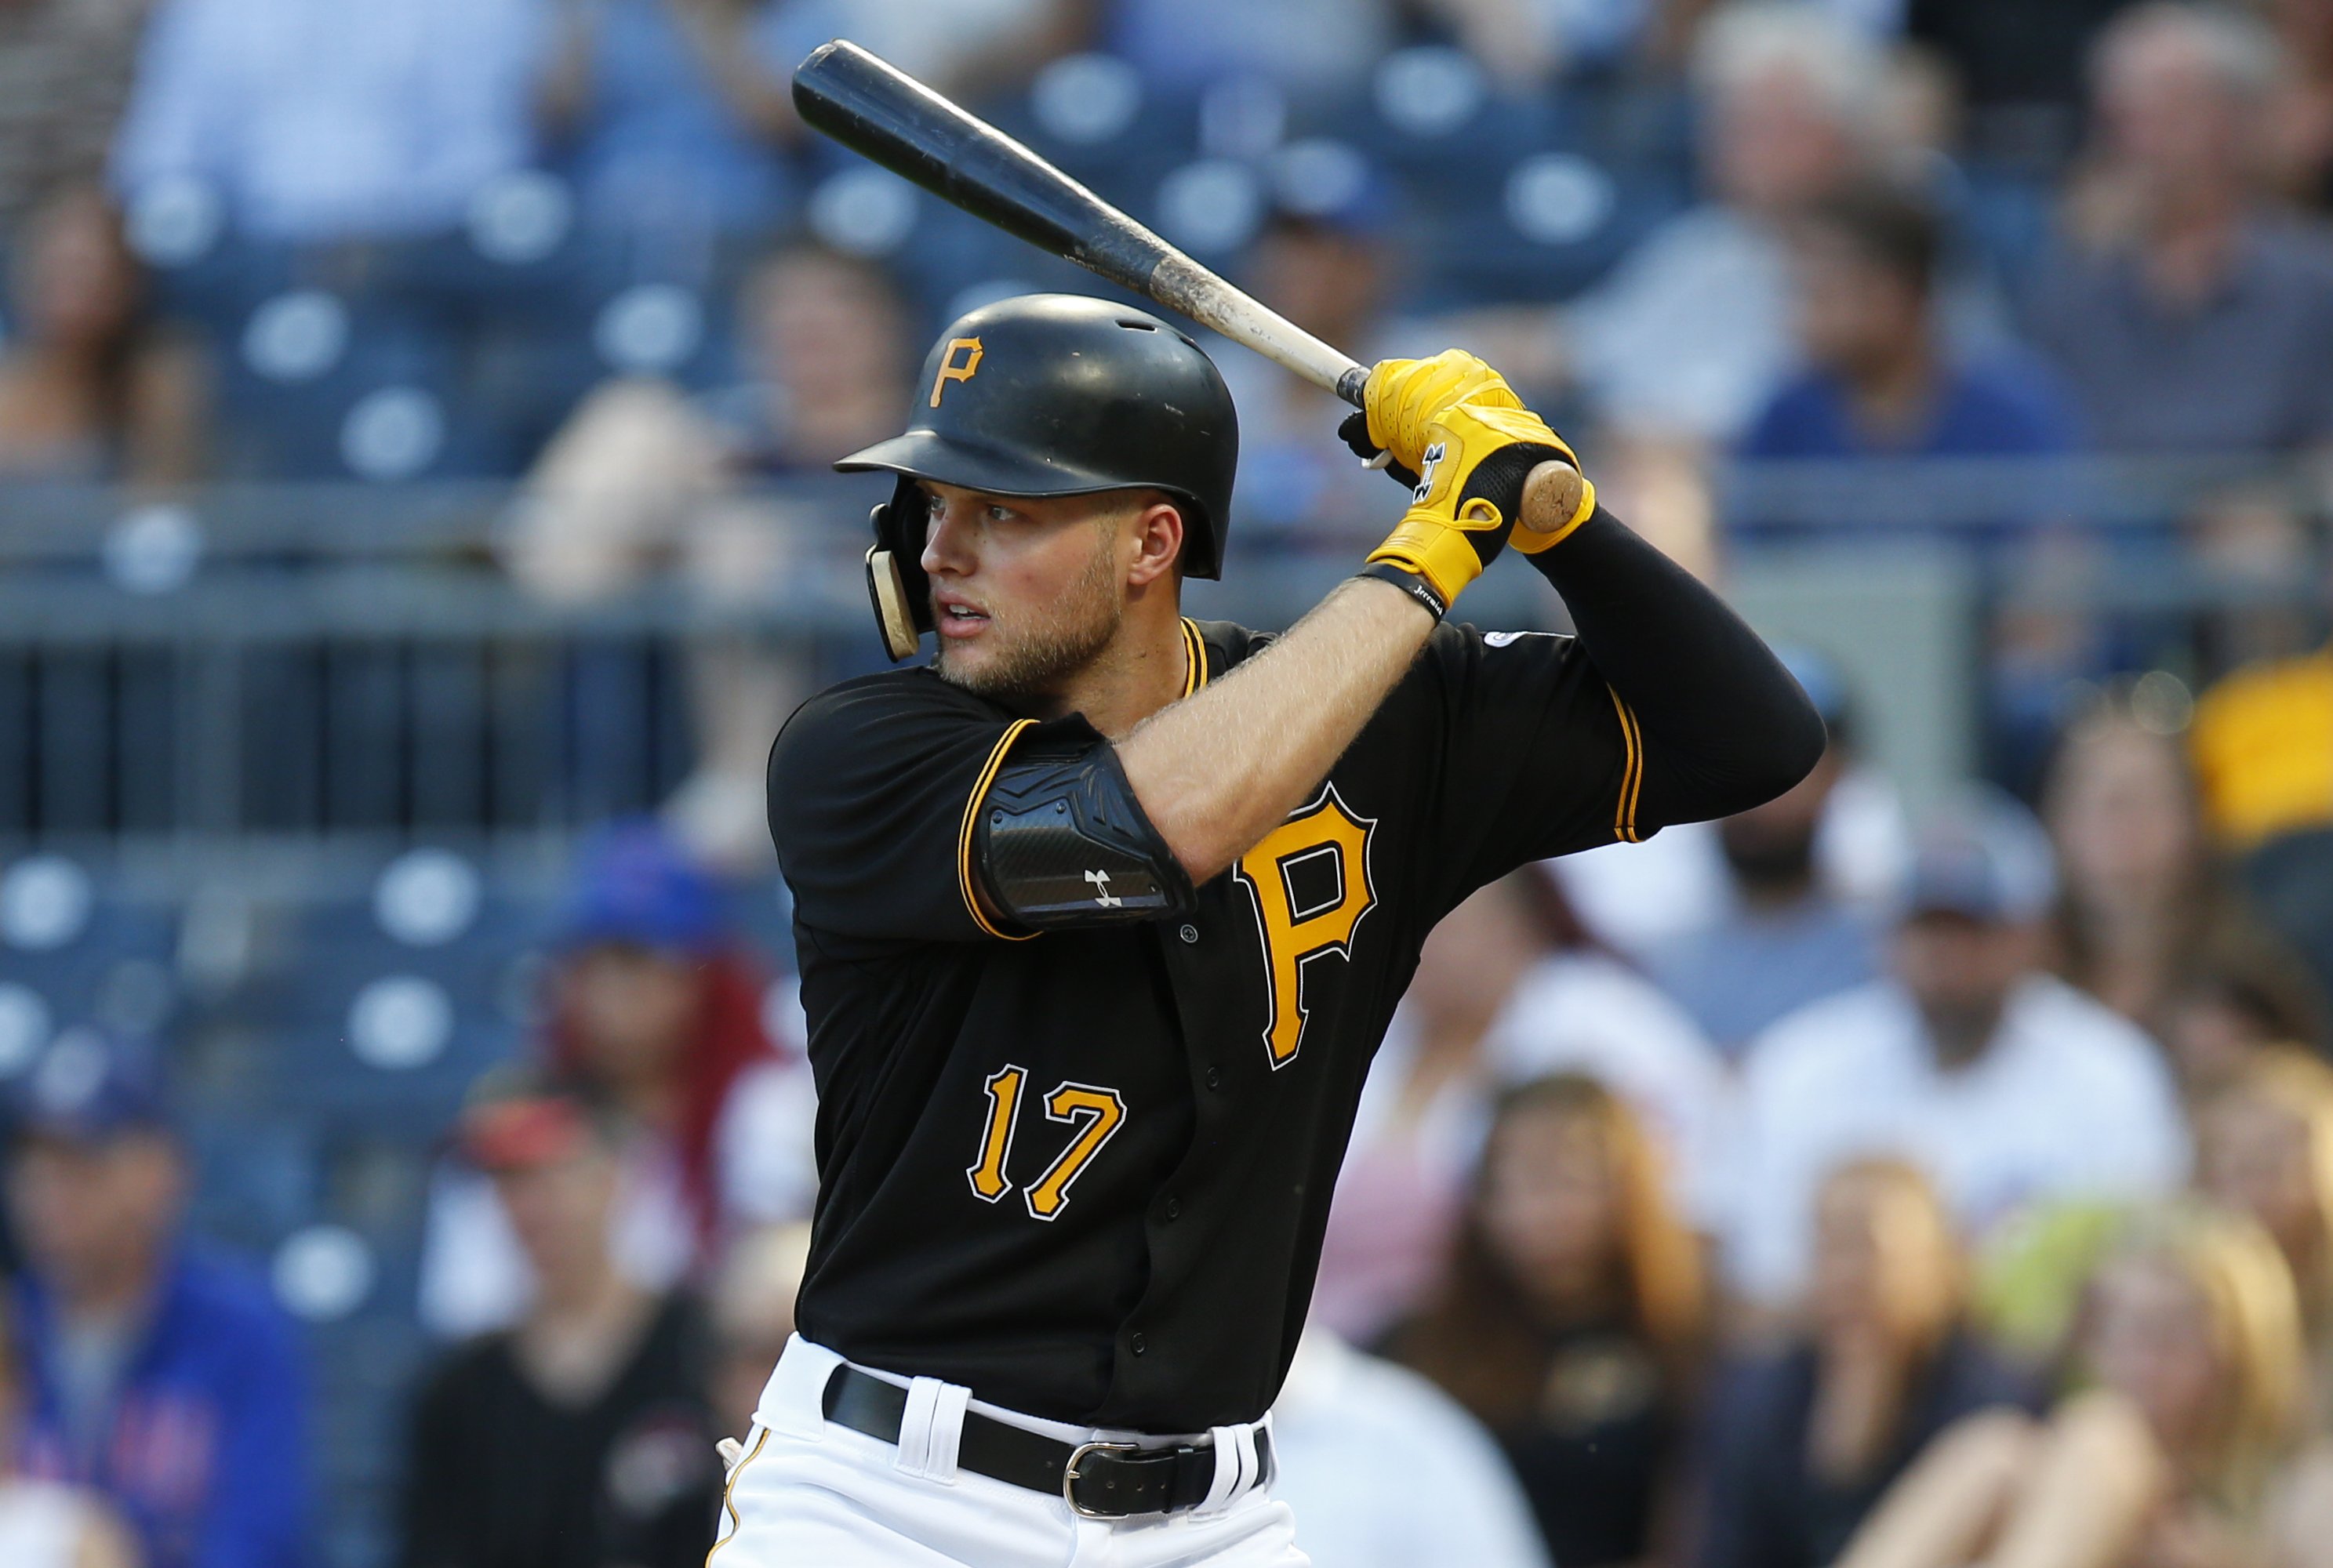 Pirates utility player Michael Chavis learns to harness his